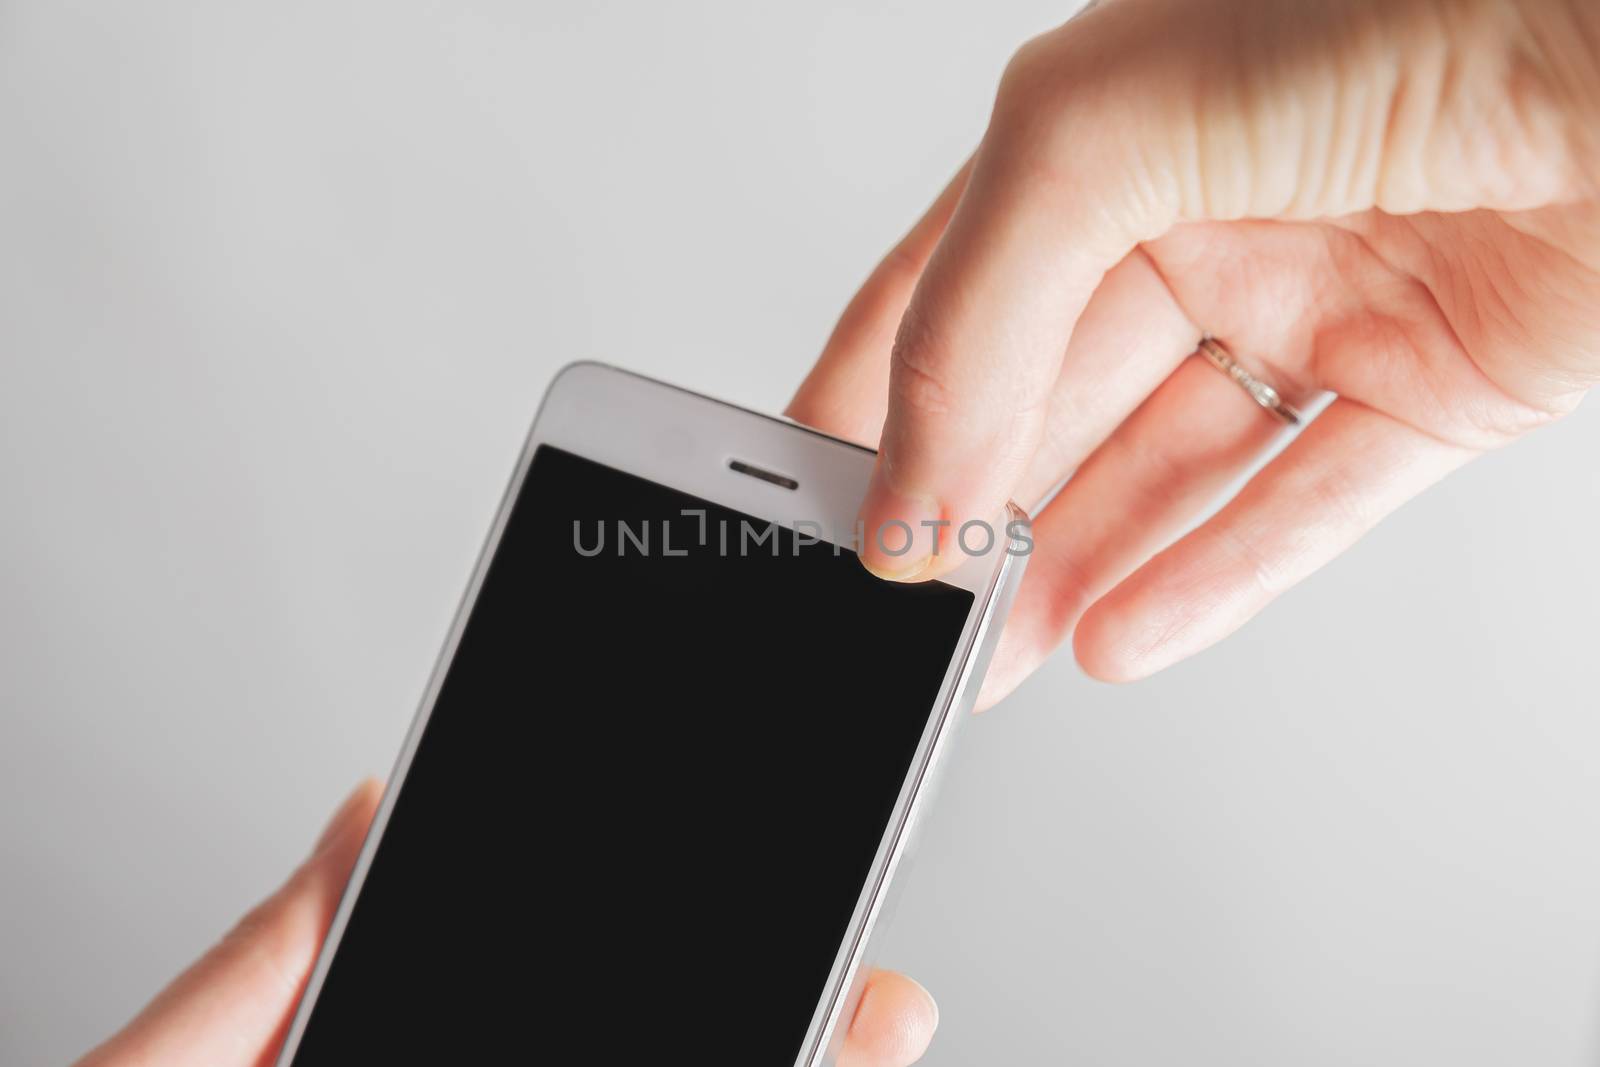 Thumb covers up the front facing camera of a smartphone by photoboyko